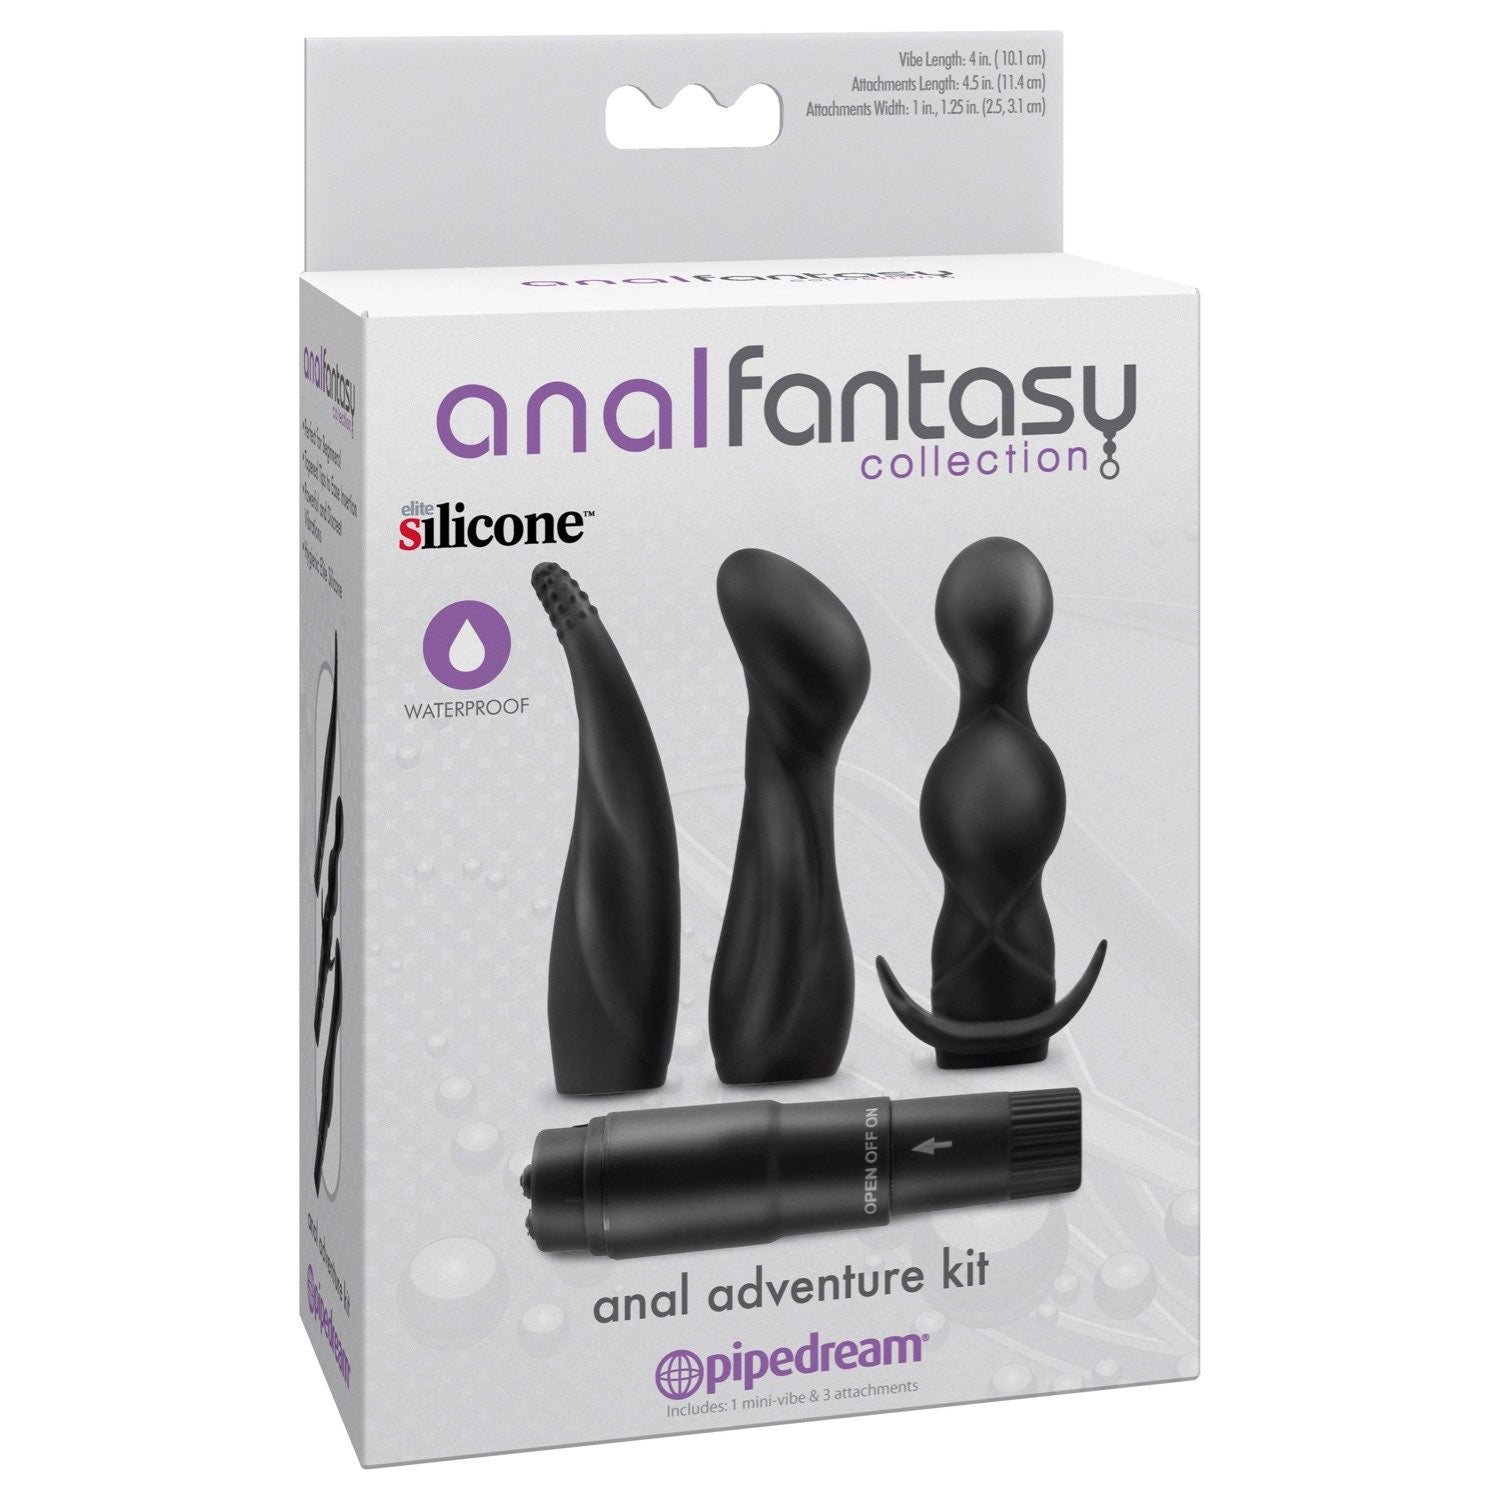 Anal Fantasy Collection Anal Adventure Kit - Black Vibrator with 3 Anal Sleeves by Pipedream